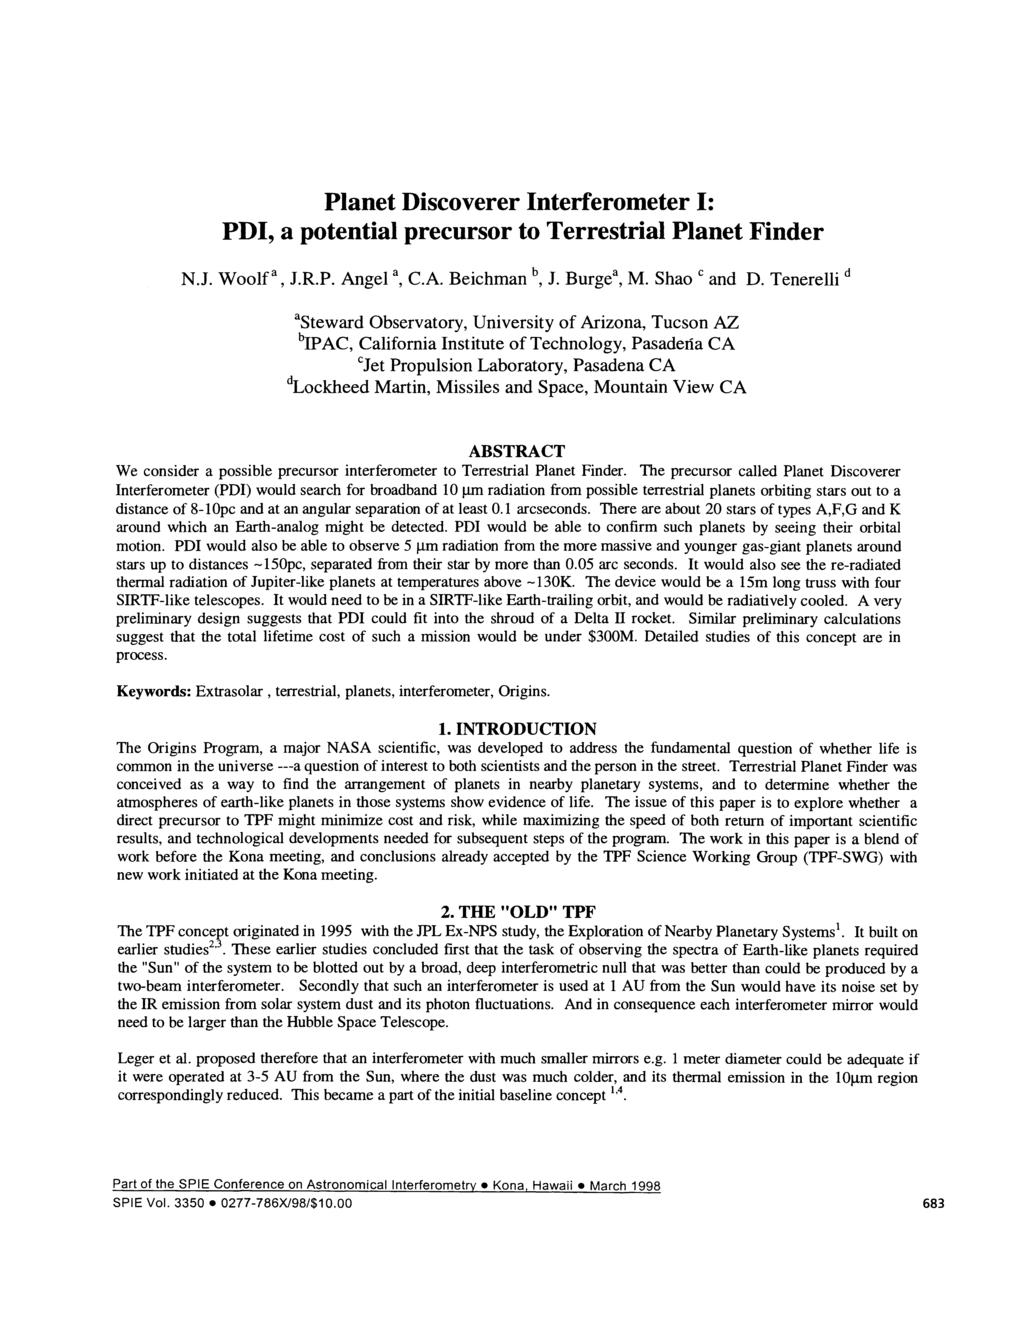 Planet Discoverer Interferometer I: PD!, a potential precursor to Terrestrial Planet Finder N.J. WOOlfa J.R.P. Angel a C.A. Beichman b Burgea, M. Shao C and D.